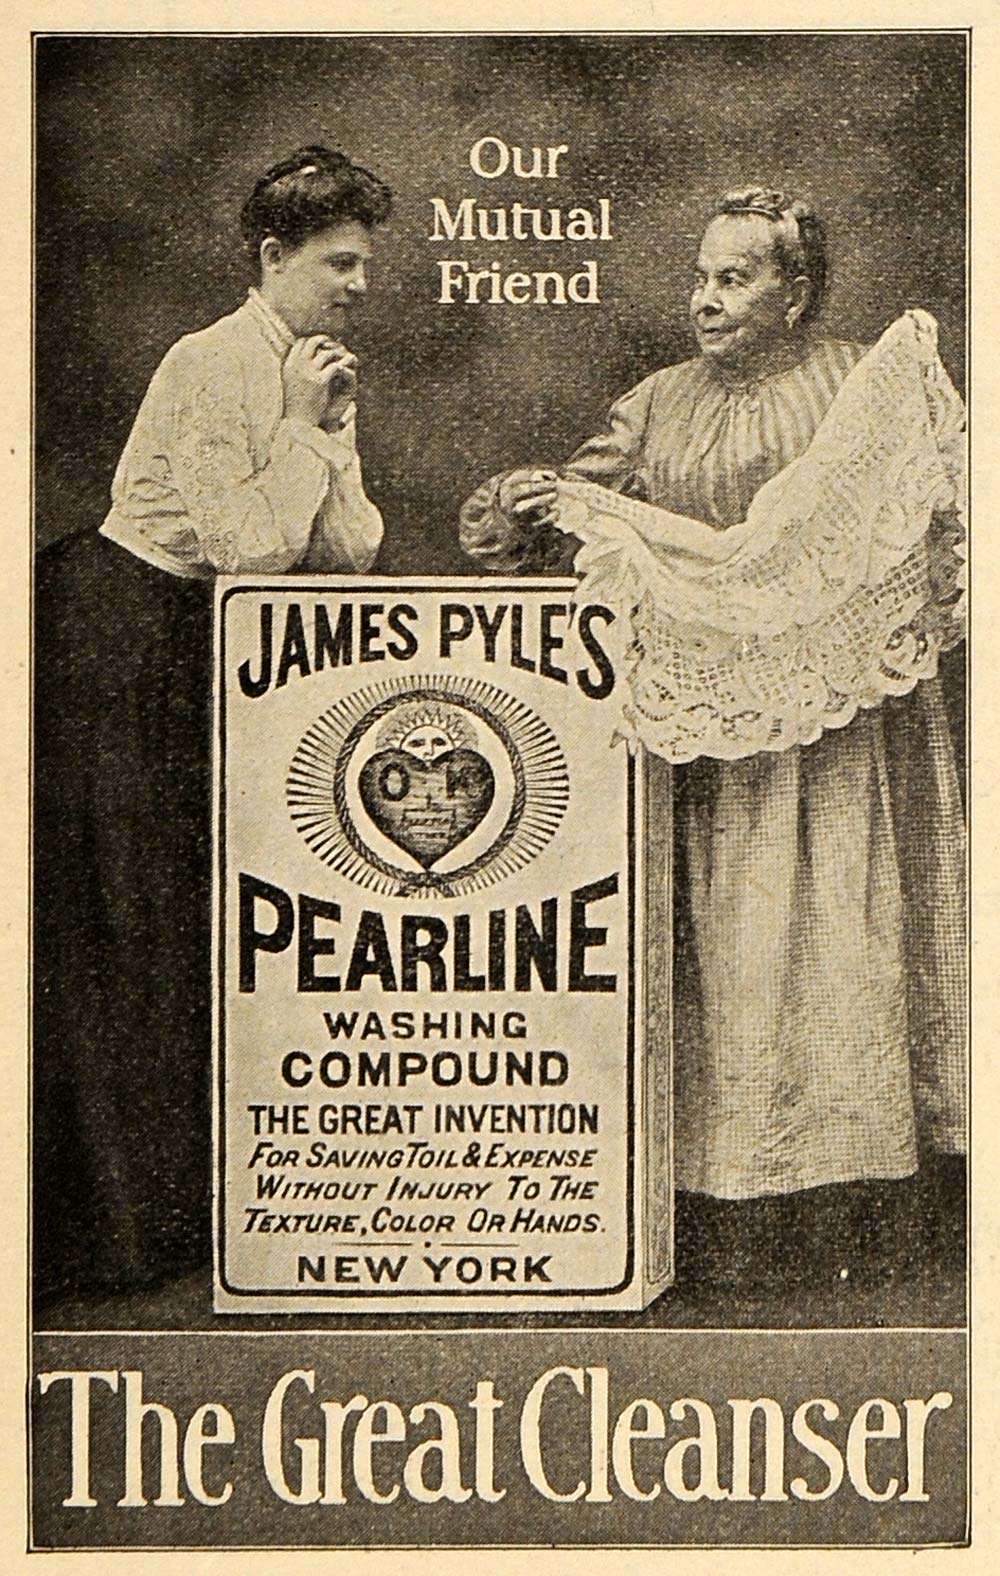 1904 Ad James Pyle's Pearling Washing Compound Soap - ORIGINAL ADVERTISING TIN4